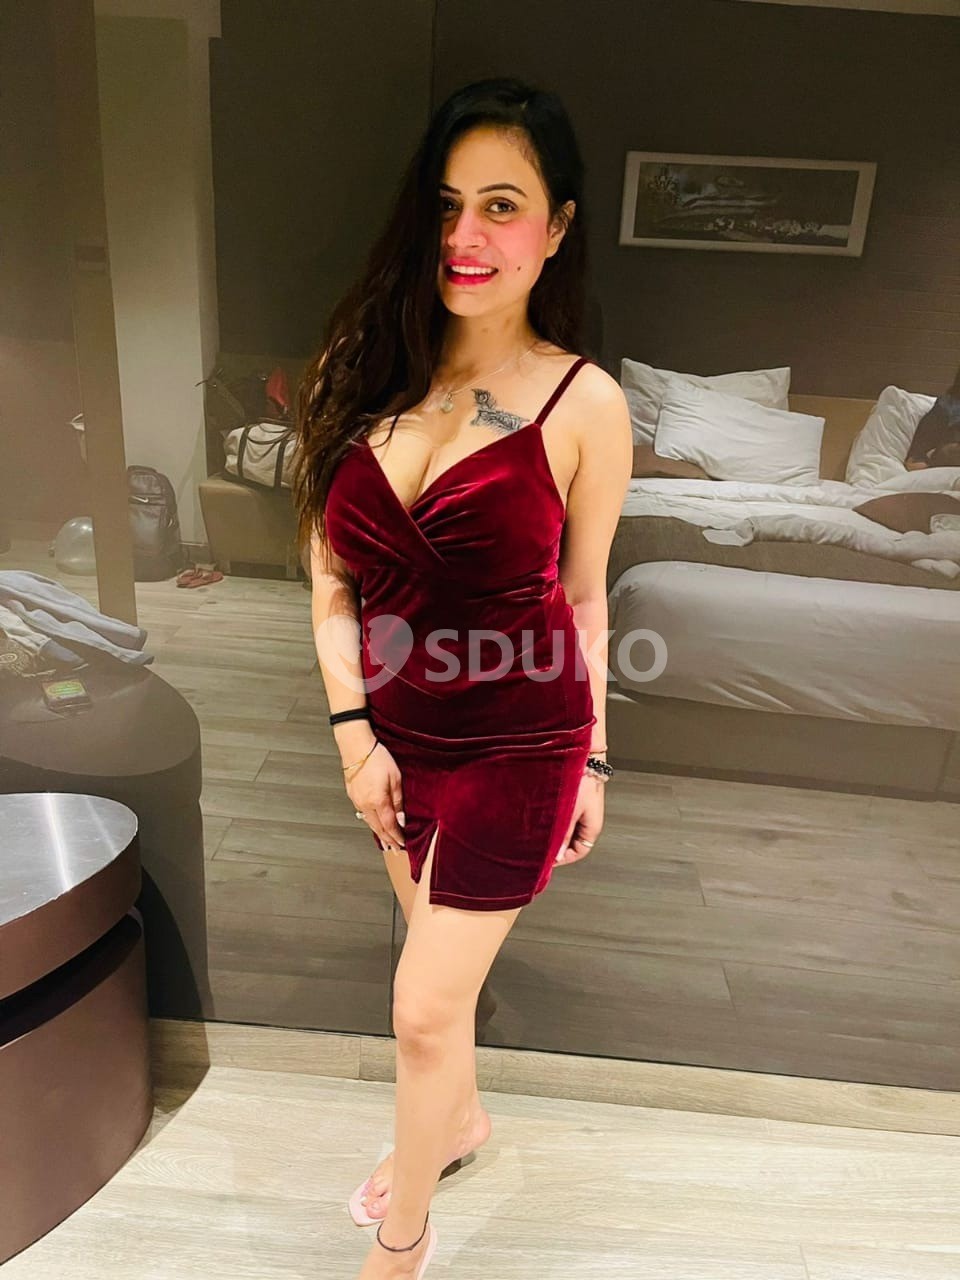 Saket ❣️❣️Low price high profile college girl and aunty available any time available service genuine vip call gi